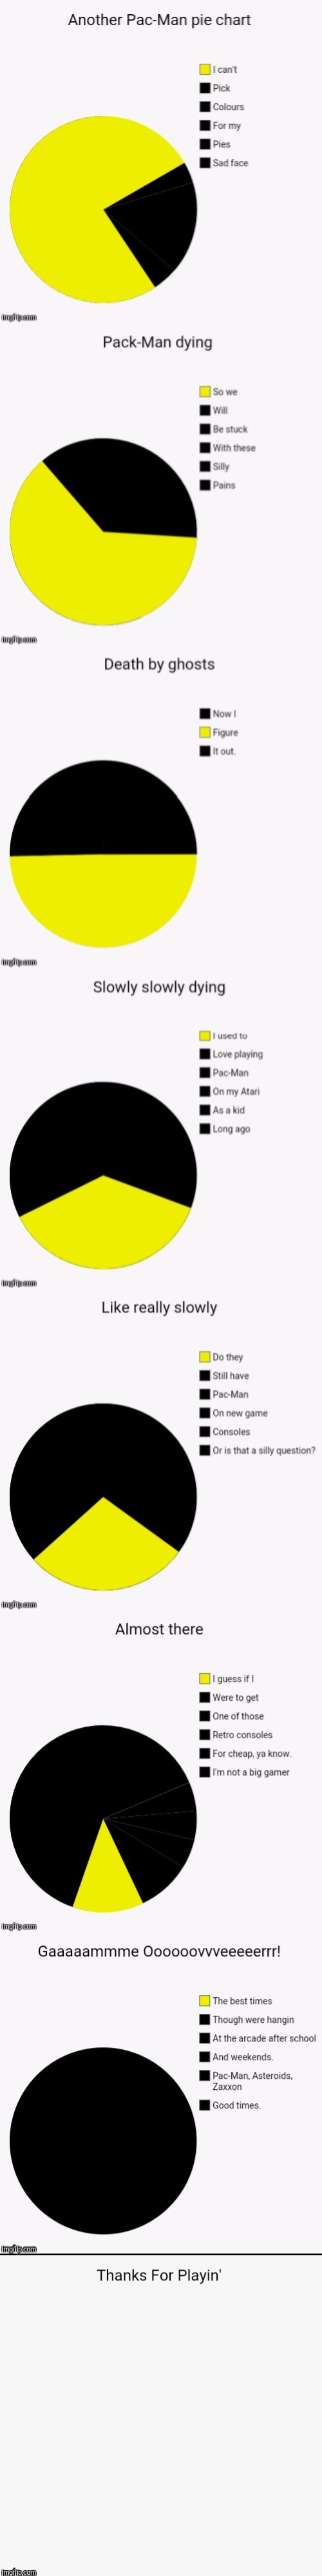 Another Pac-Man pie chart? Or chain meme? | image tagged in memes,funny,pac-man,pie charts | made w/ Imgflip meme maker